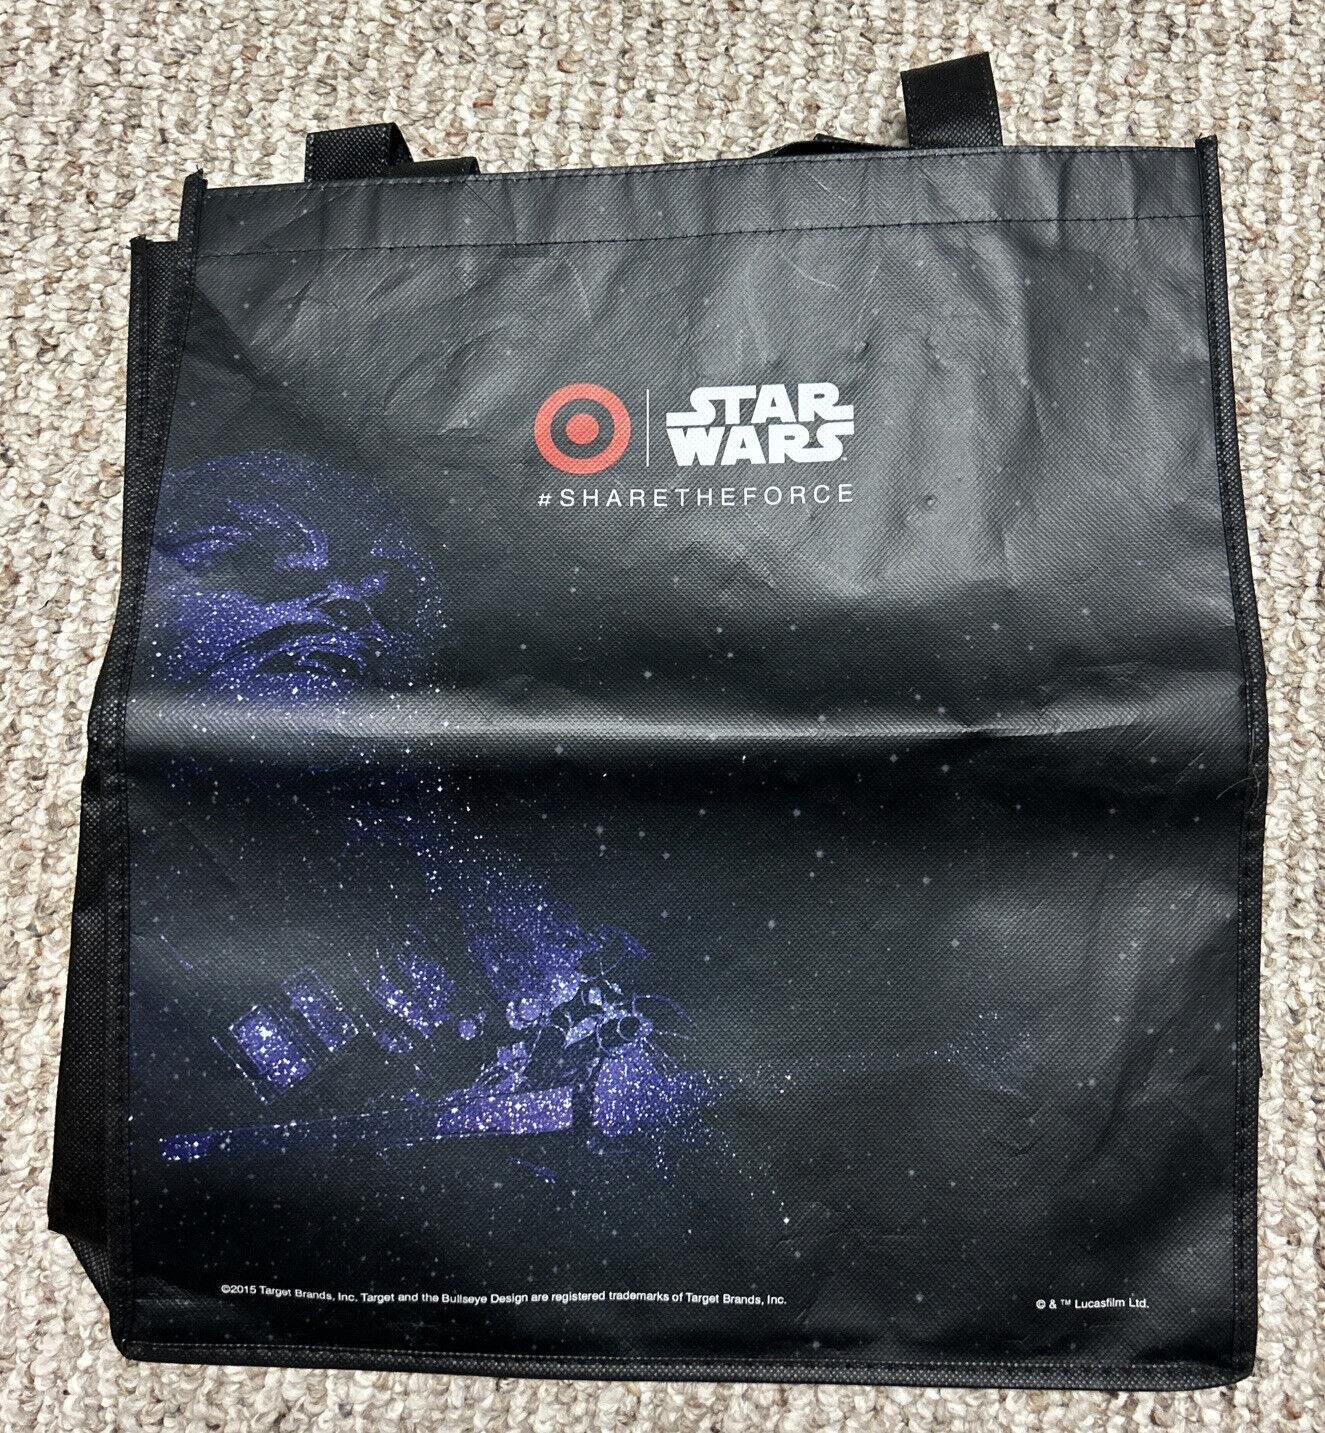 New 2015 Target Stores Star Wars # Share The Force Promotional Tote Bag